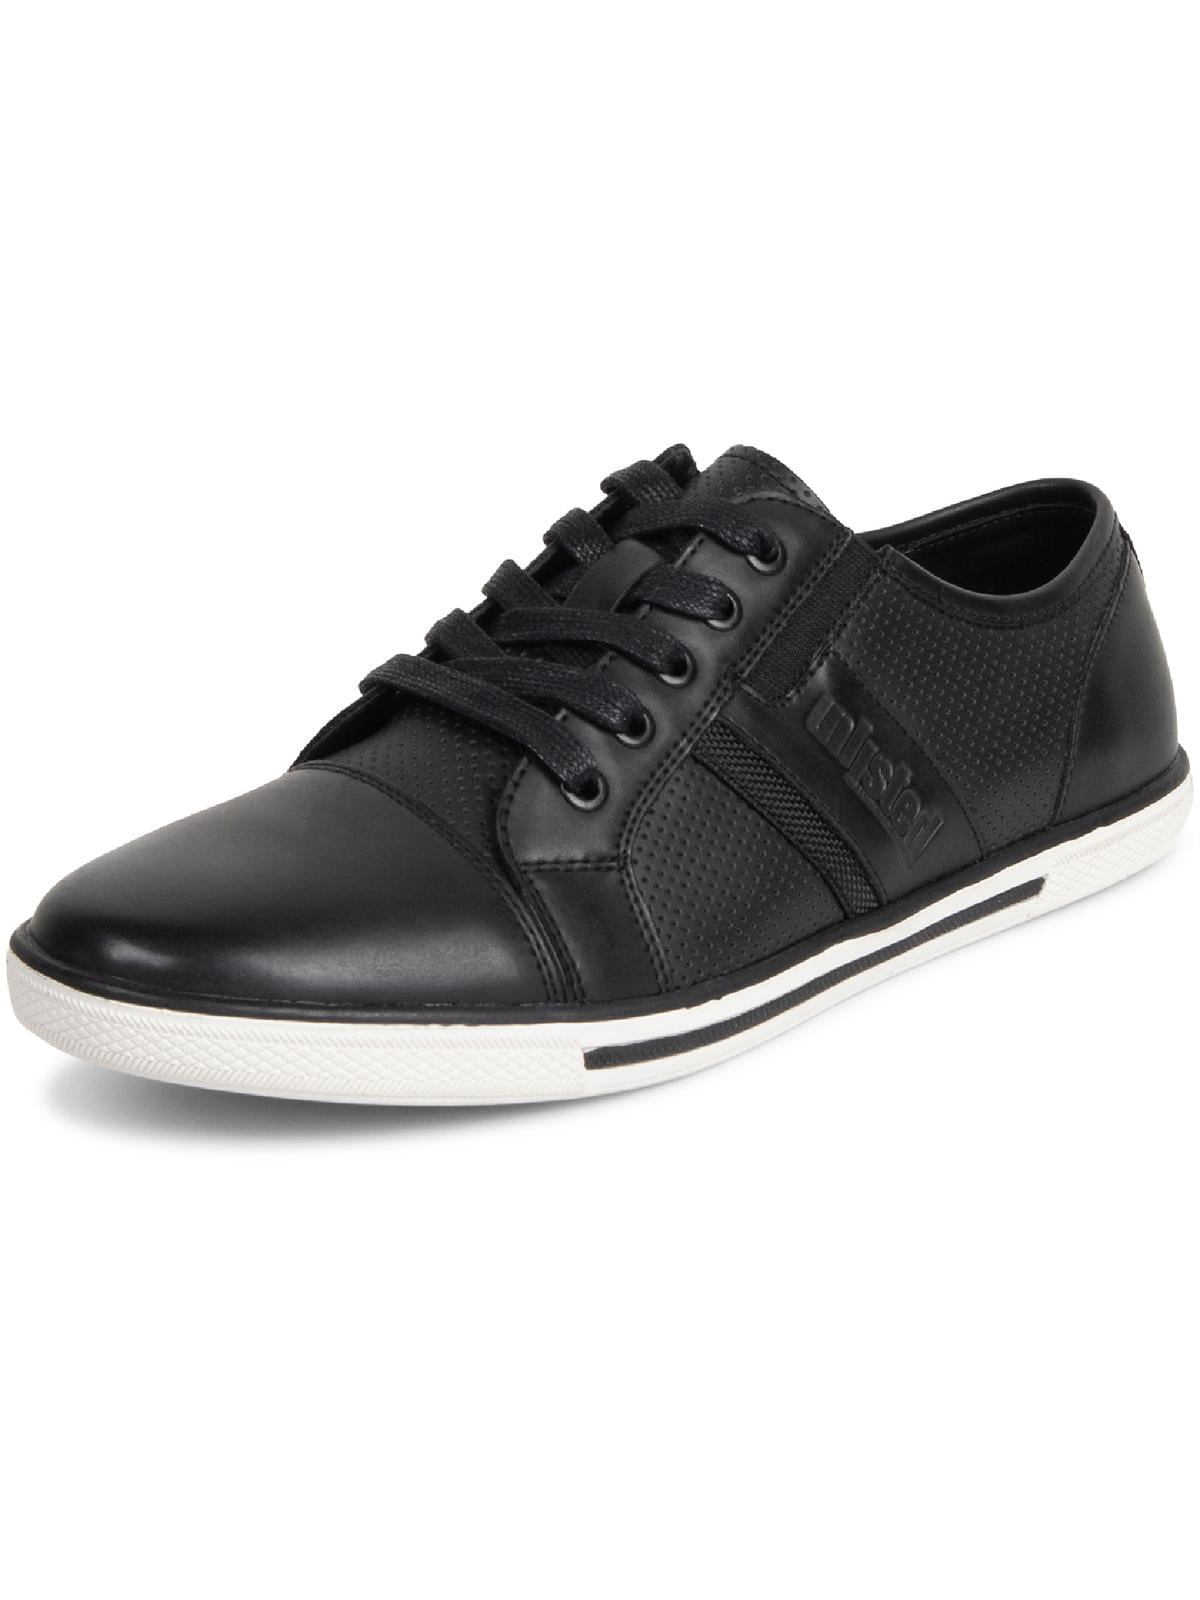 Kenneth Cole Men's Unlisted Shiny Crown Faux Leather Sneakers - Walmart.com